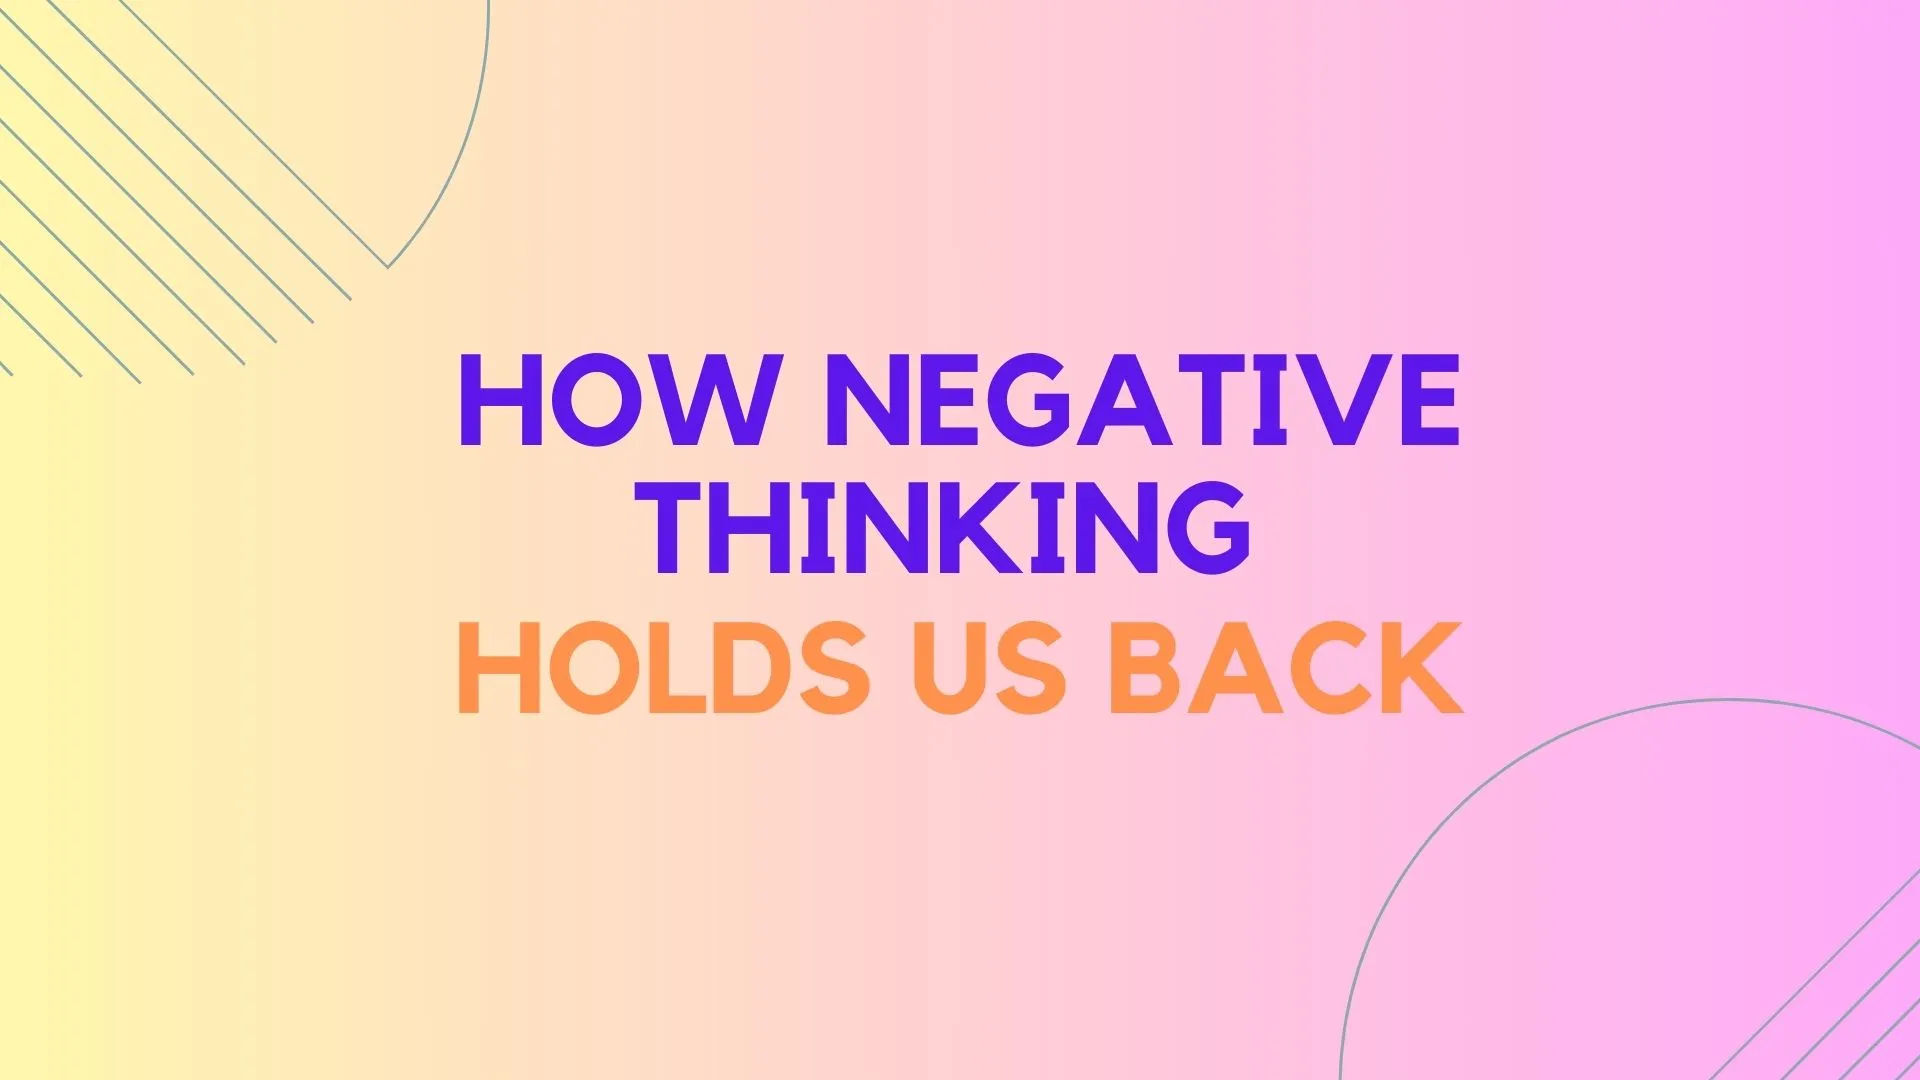 Struggling with Negative Thinking